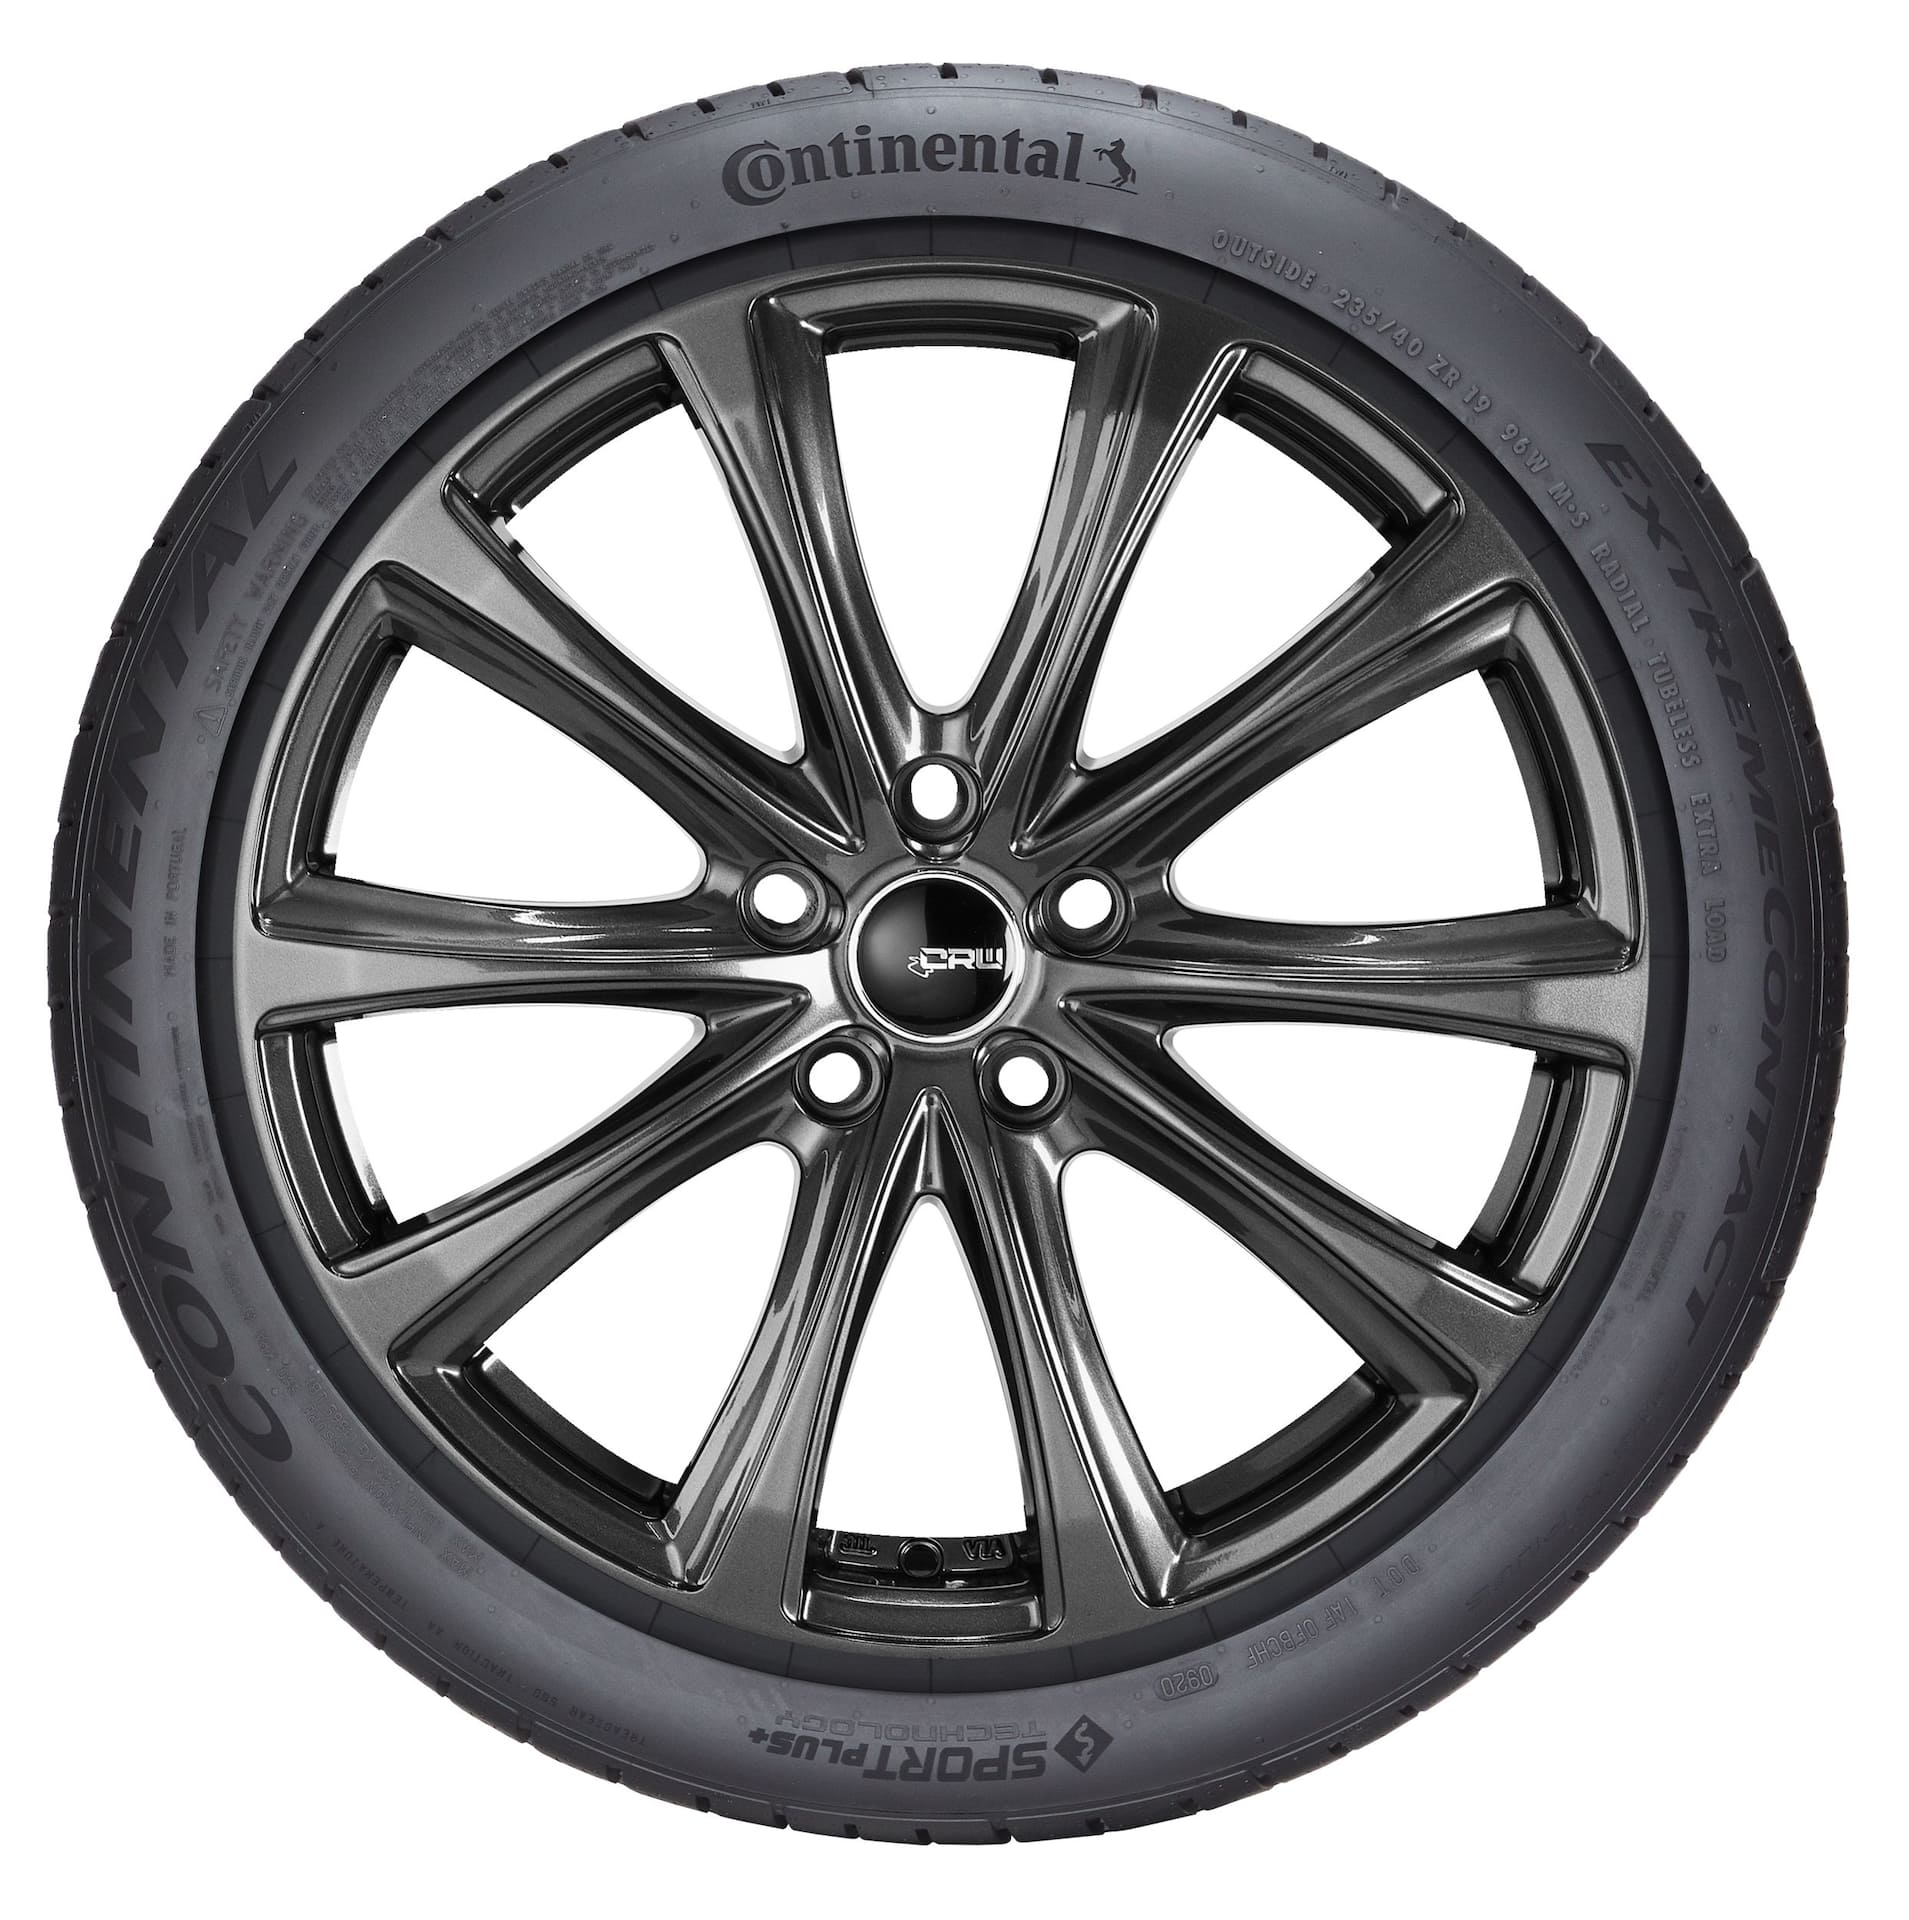 Continental ExtremeContact DWS06+ Performance Tire For Passenger